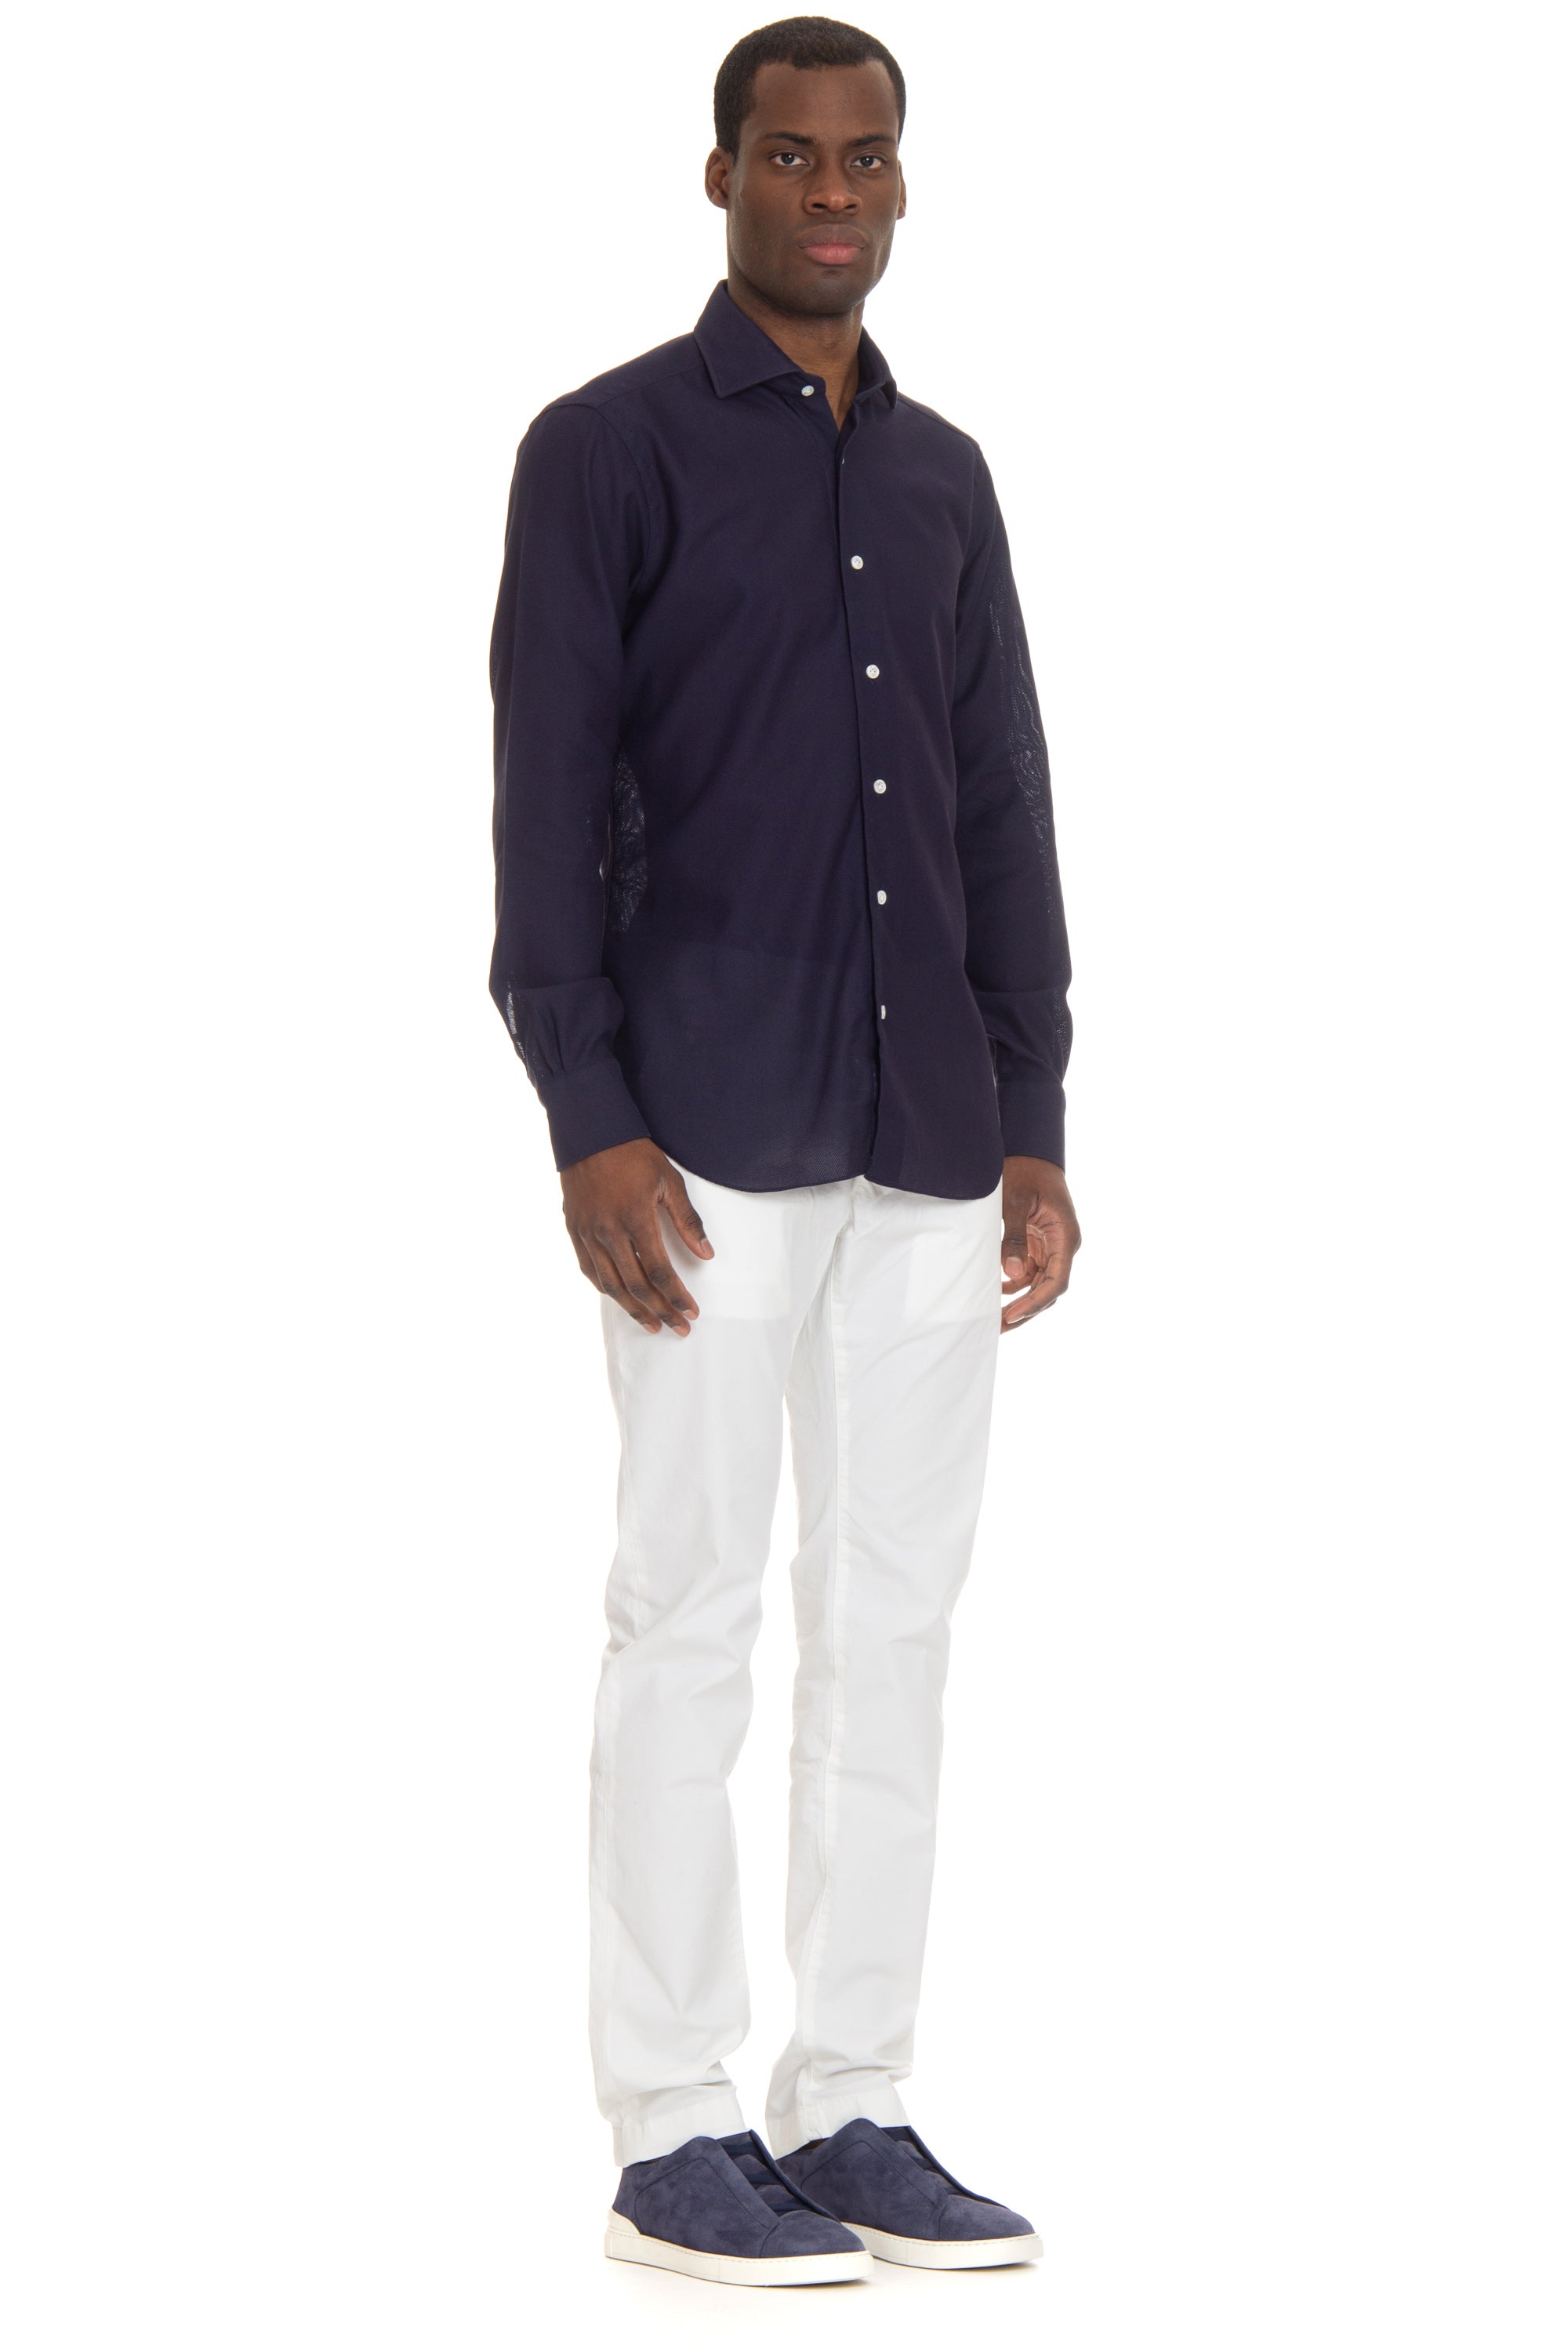 Culto label stretch honeycomb tailored shirt